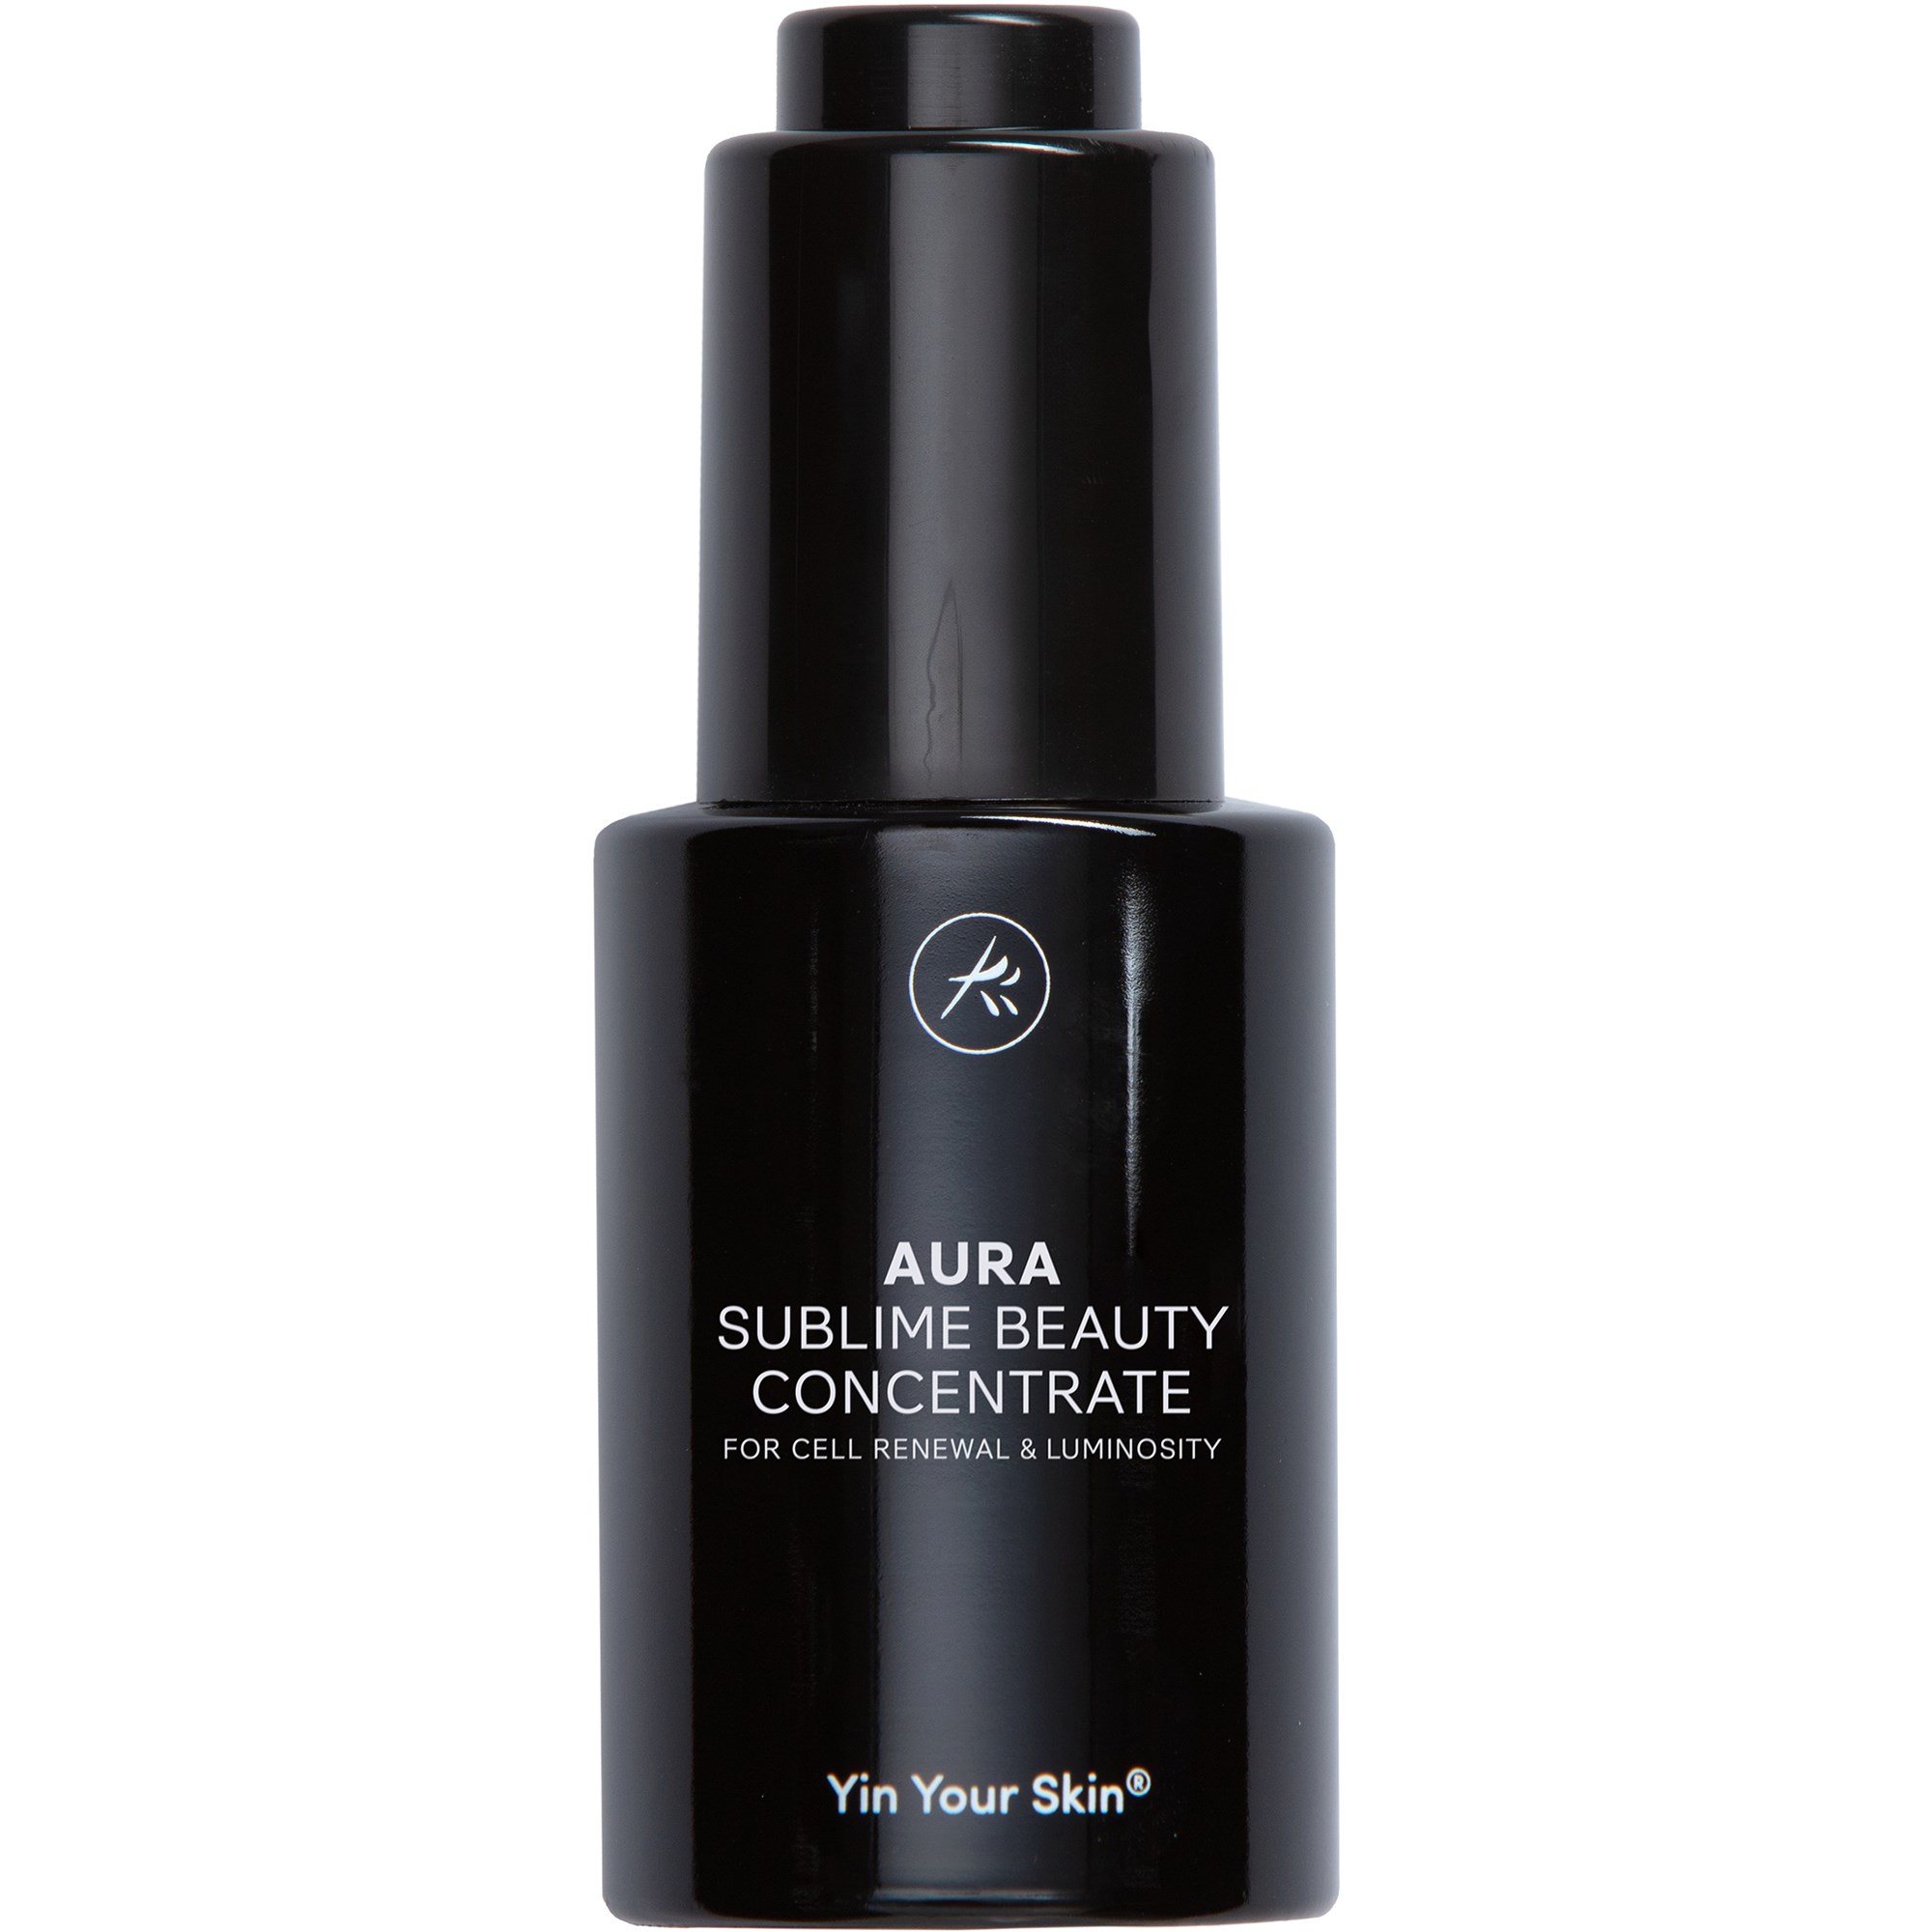 Läs mer om Yin Your Skin AURA Sublime Beauty Concentrate 30 ml